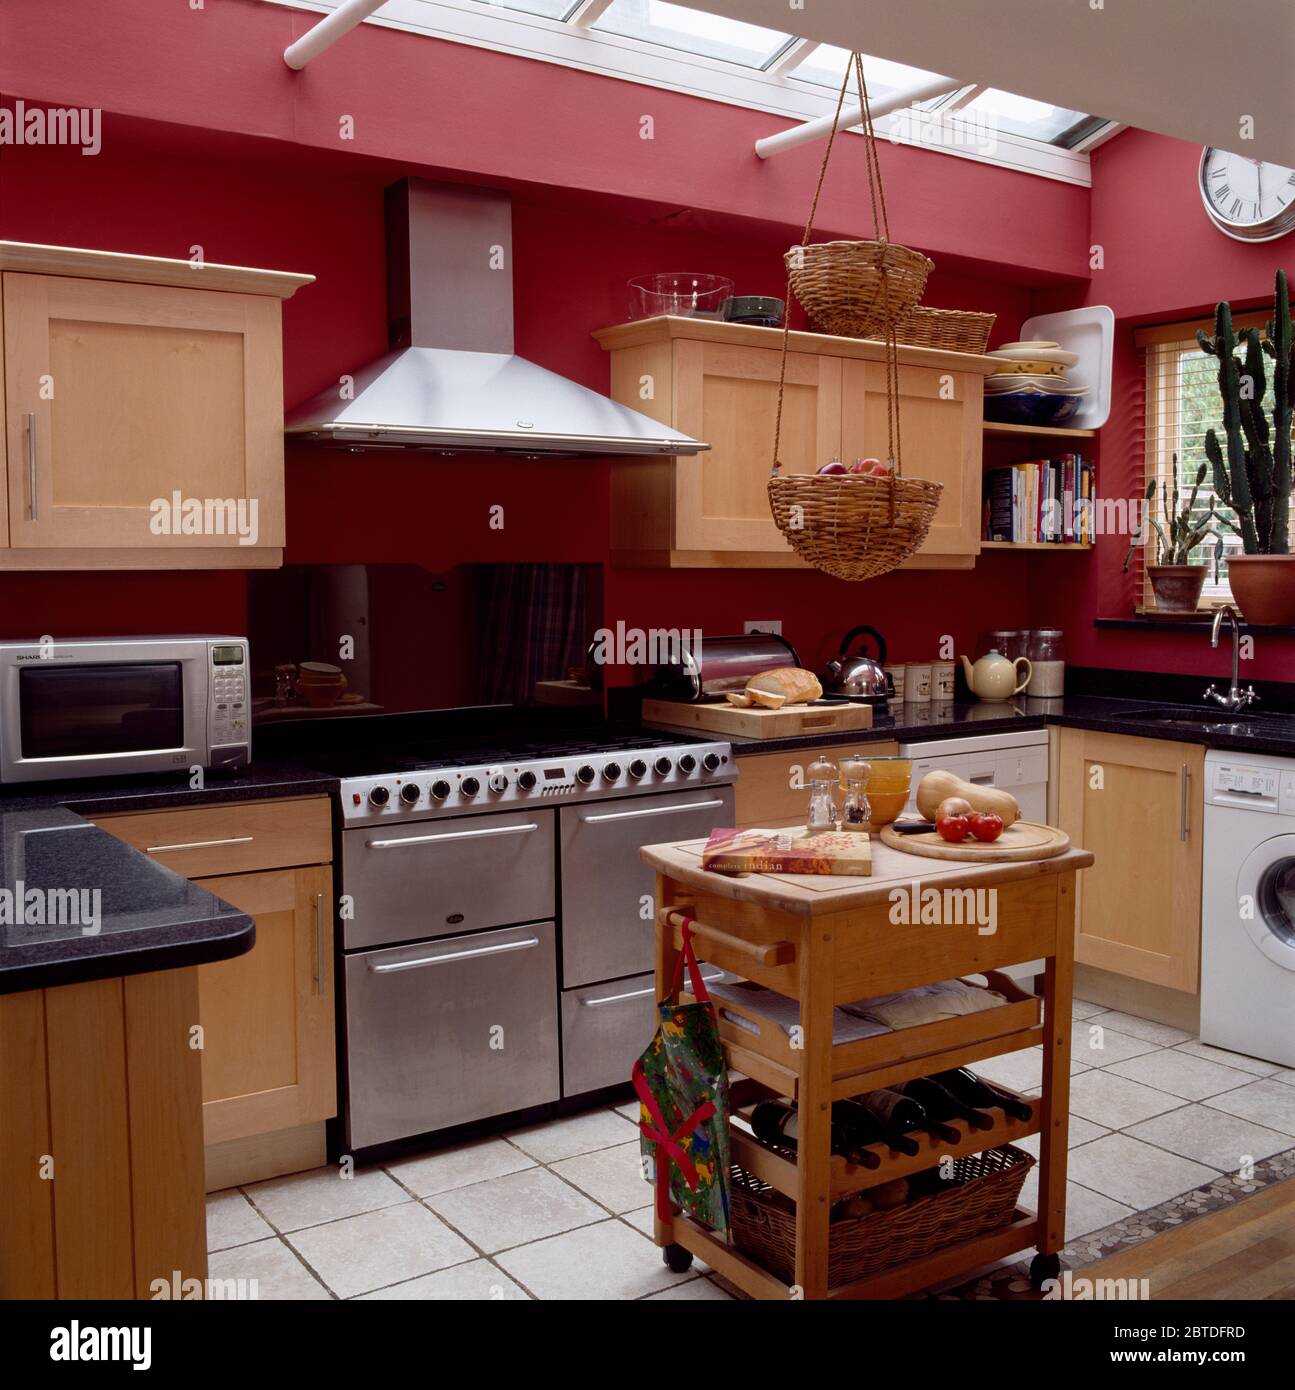 Butcher's block in modern red kitchen with range oven Stock Photo